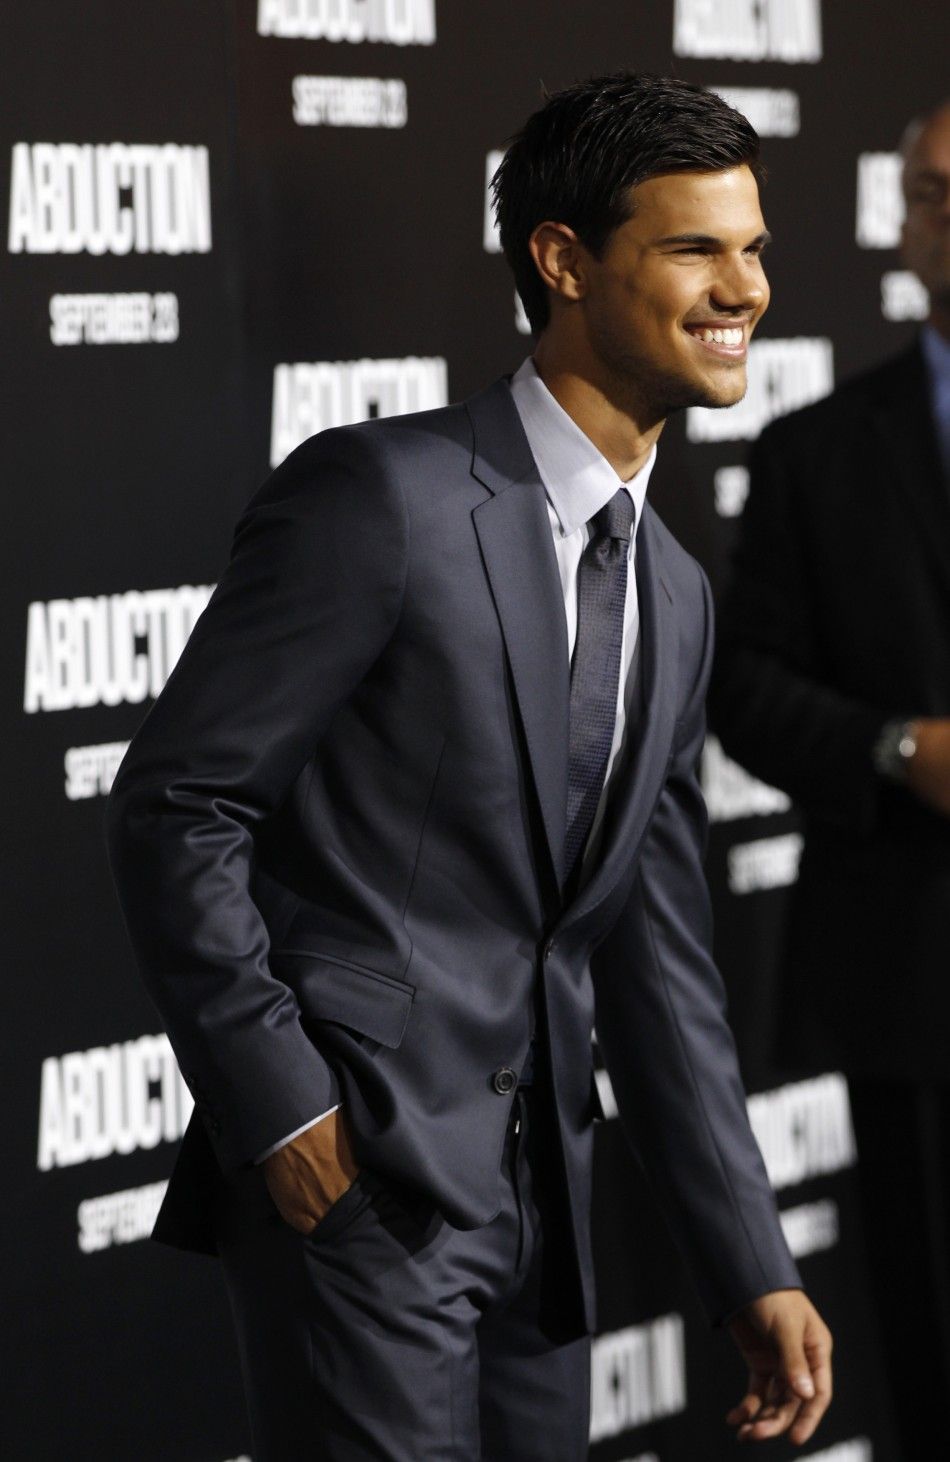 Lautner poses during the world premiere of quotAbductionquot in Hollywood